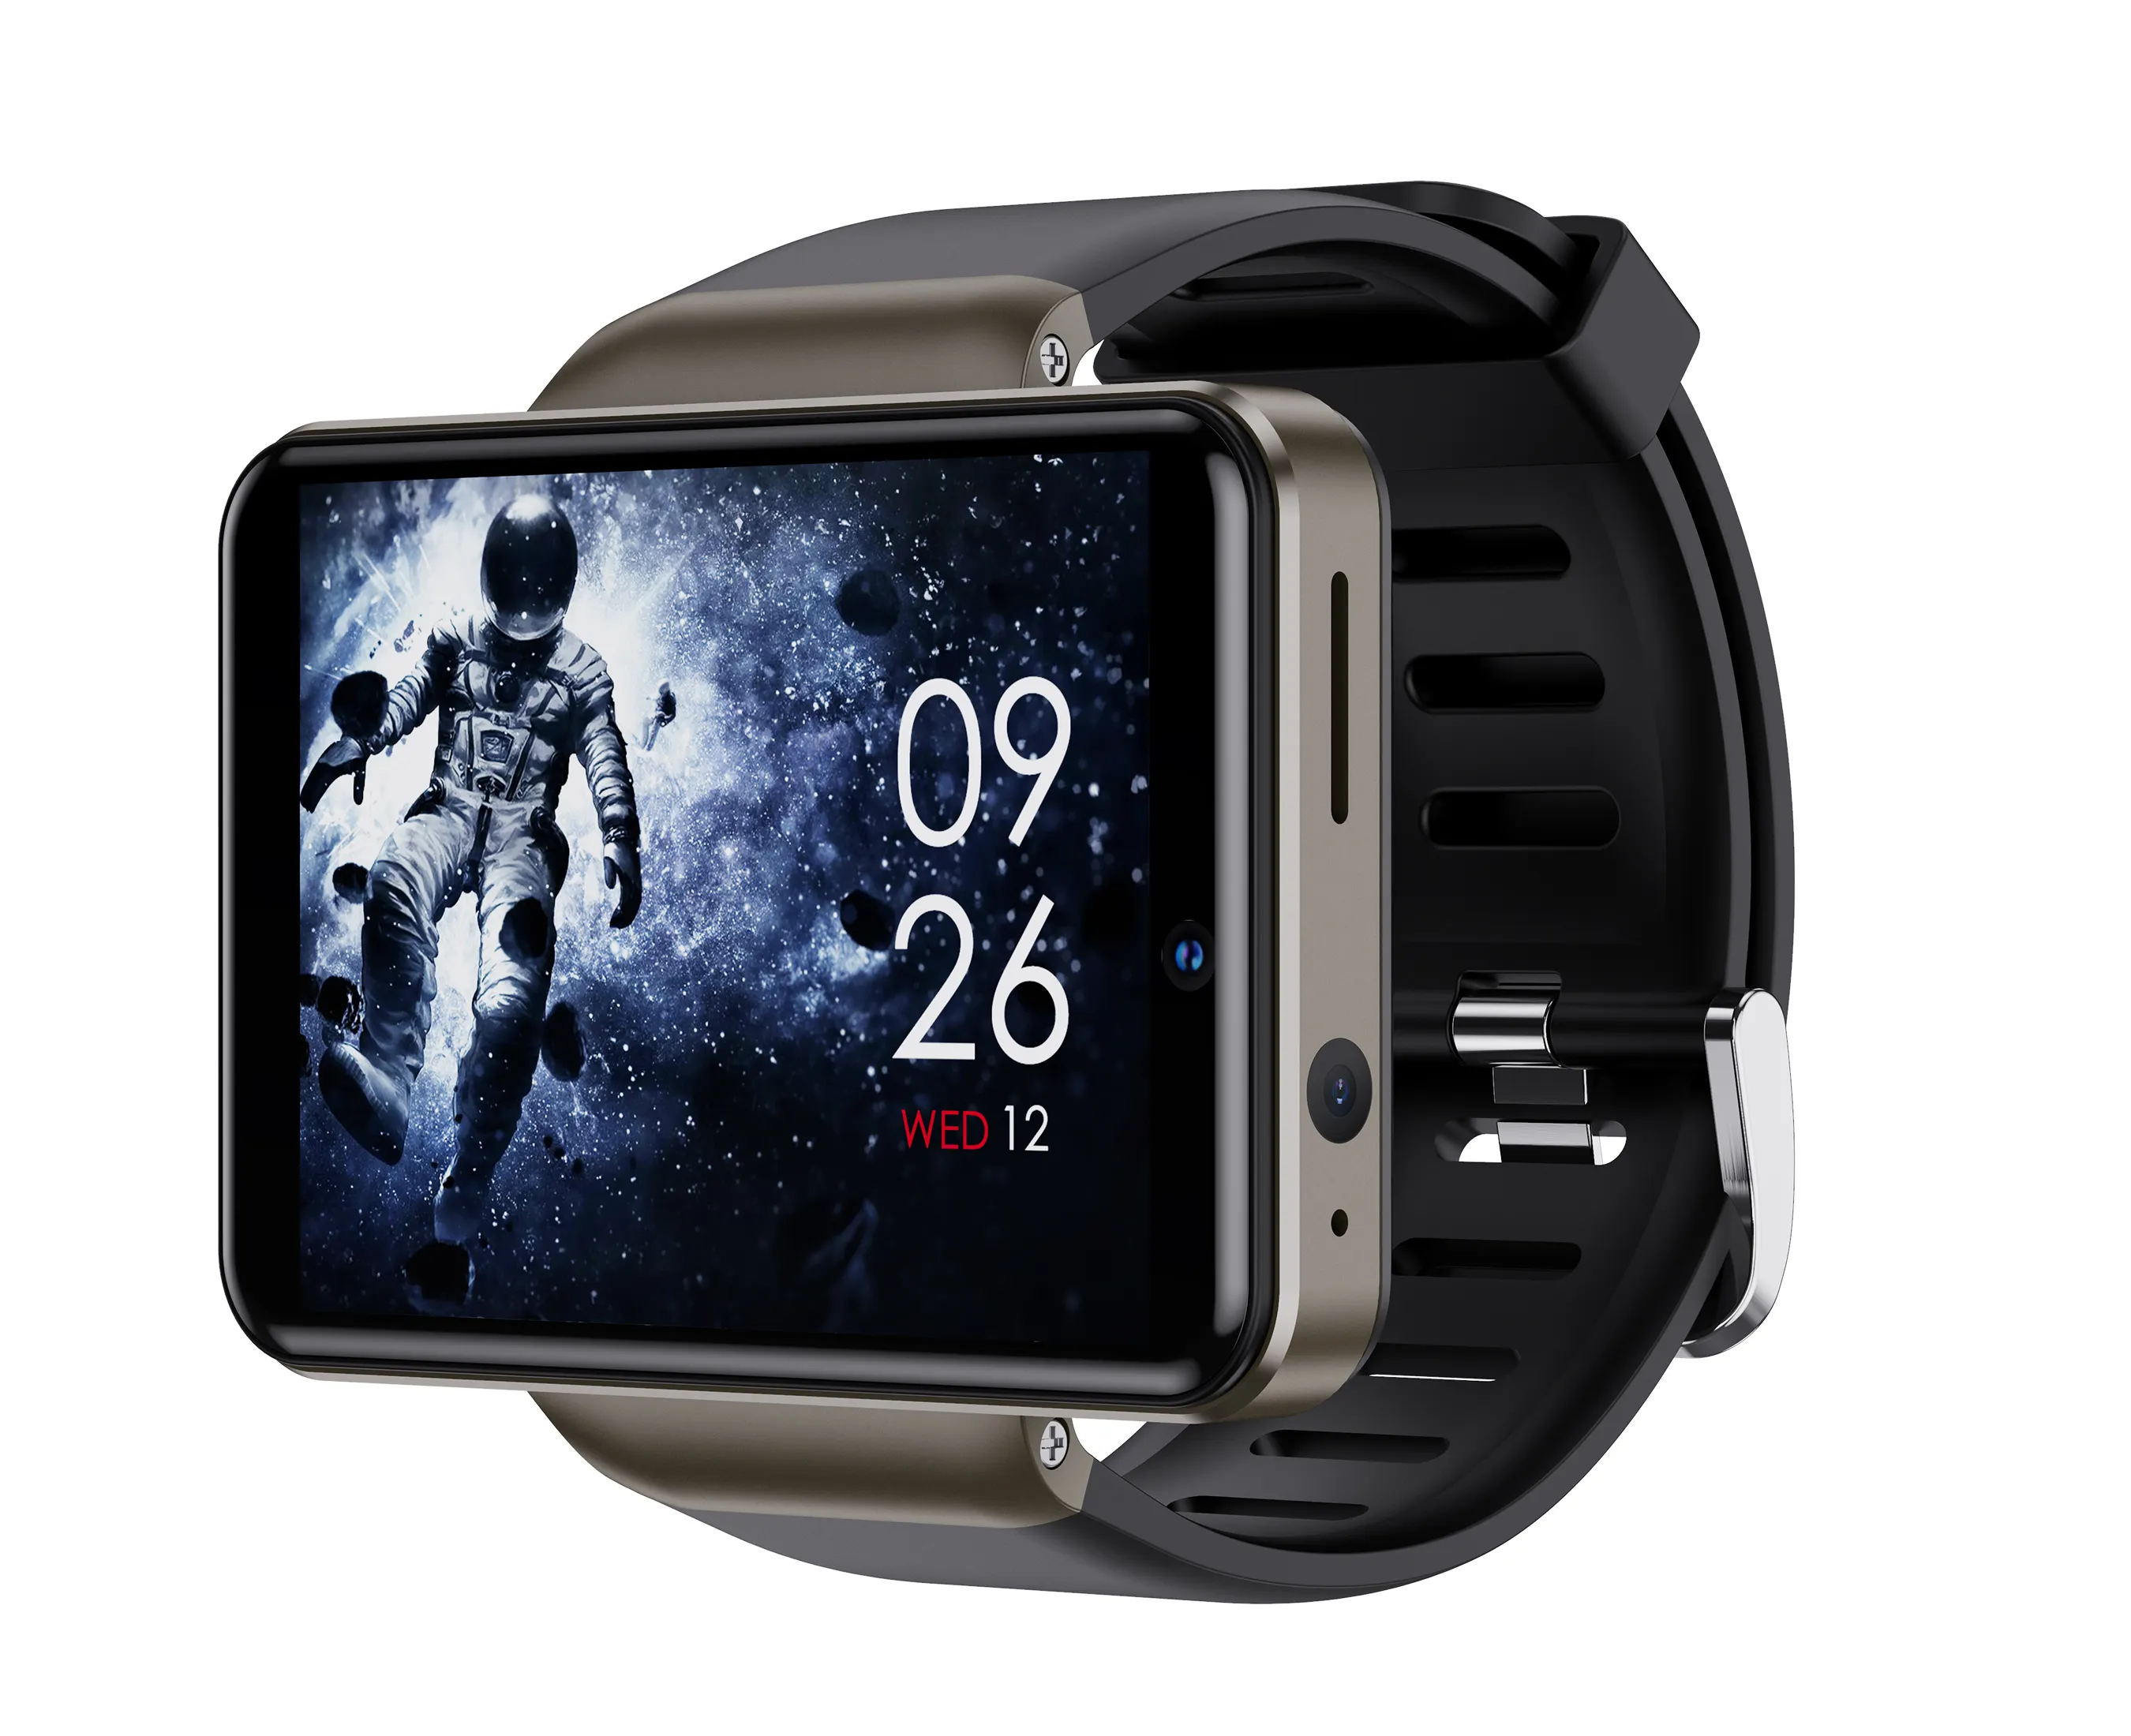 DM101 Smart Watch Camera 2.4 inch Android 7.1 Touch 3+32GB Smartwatch GPS WiFi 2022 Smart Watch 4G LTE Mobile phones